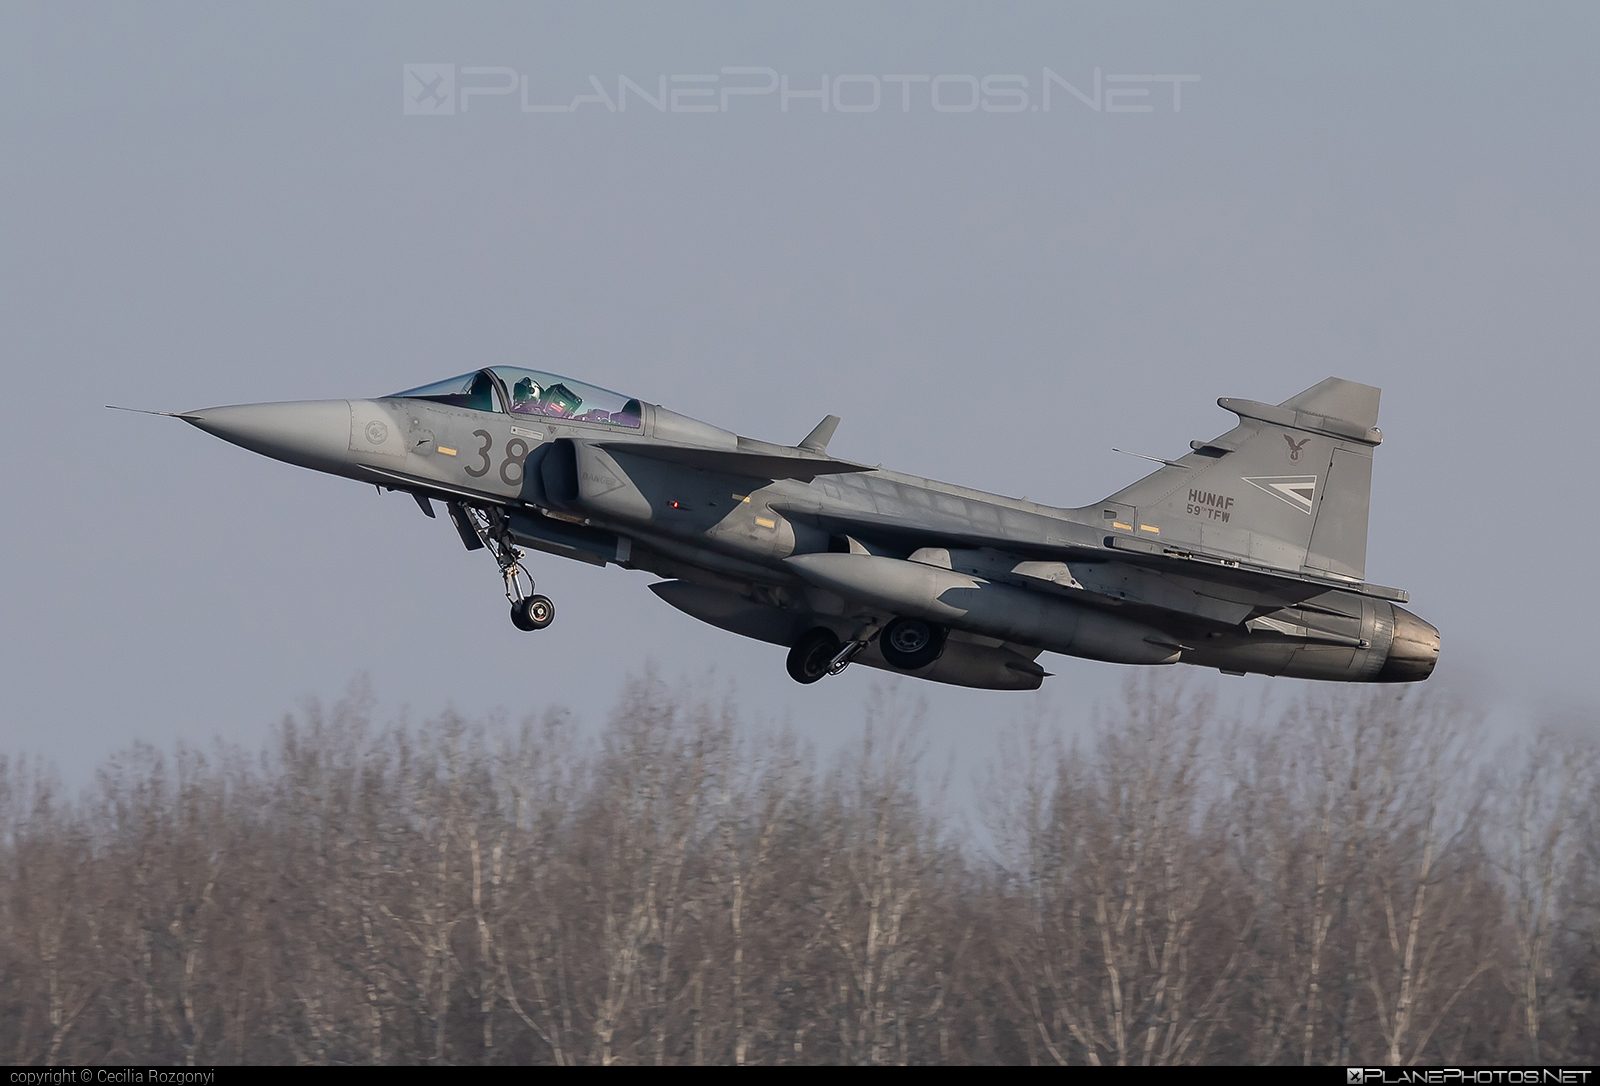 Saab JAS 39C Gripen - 38 operated by Magyar Légierő (Hungarian Air Force) #gripen #hungarianairforce #jas39 #jas39c #jas39gripen #magyarlegiero #saab